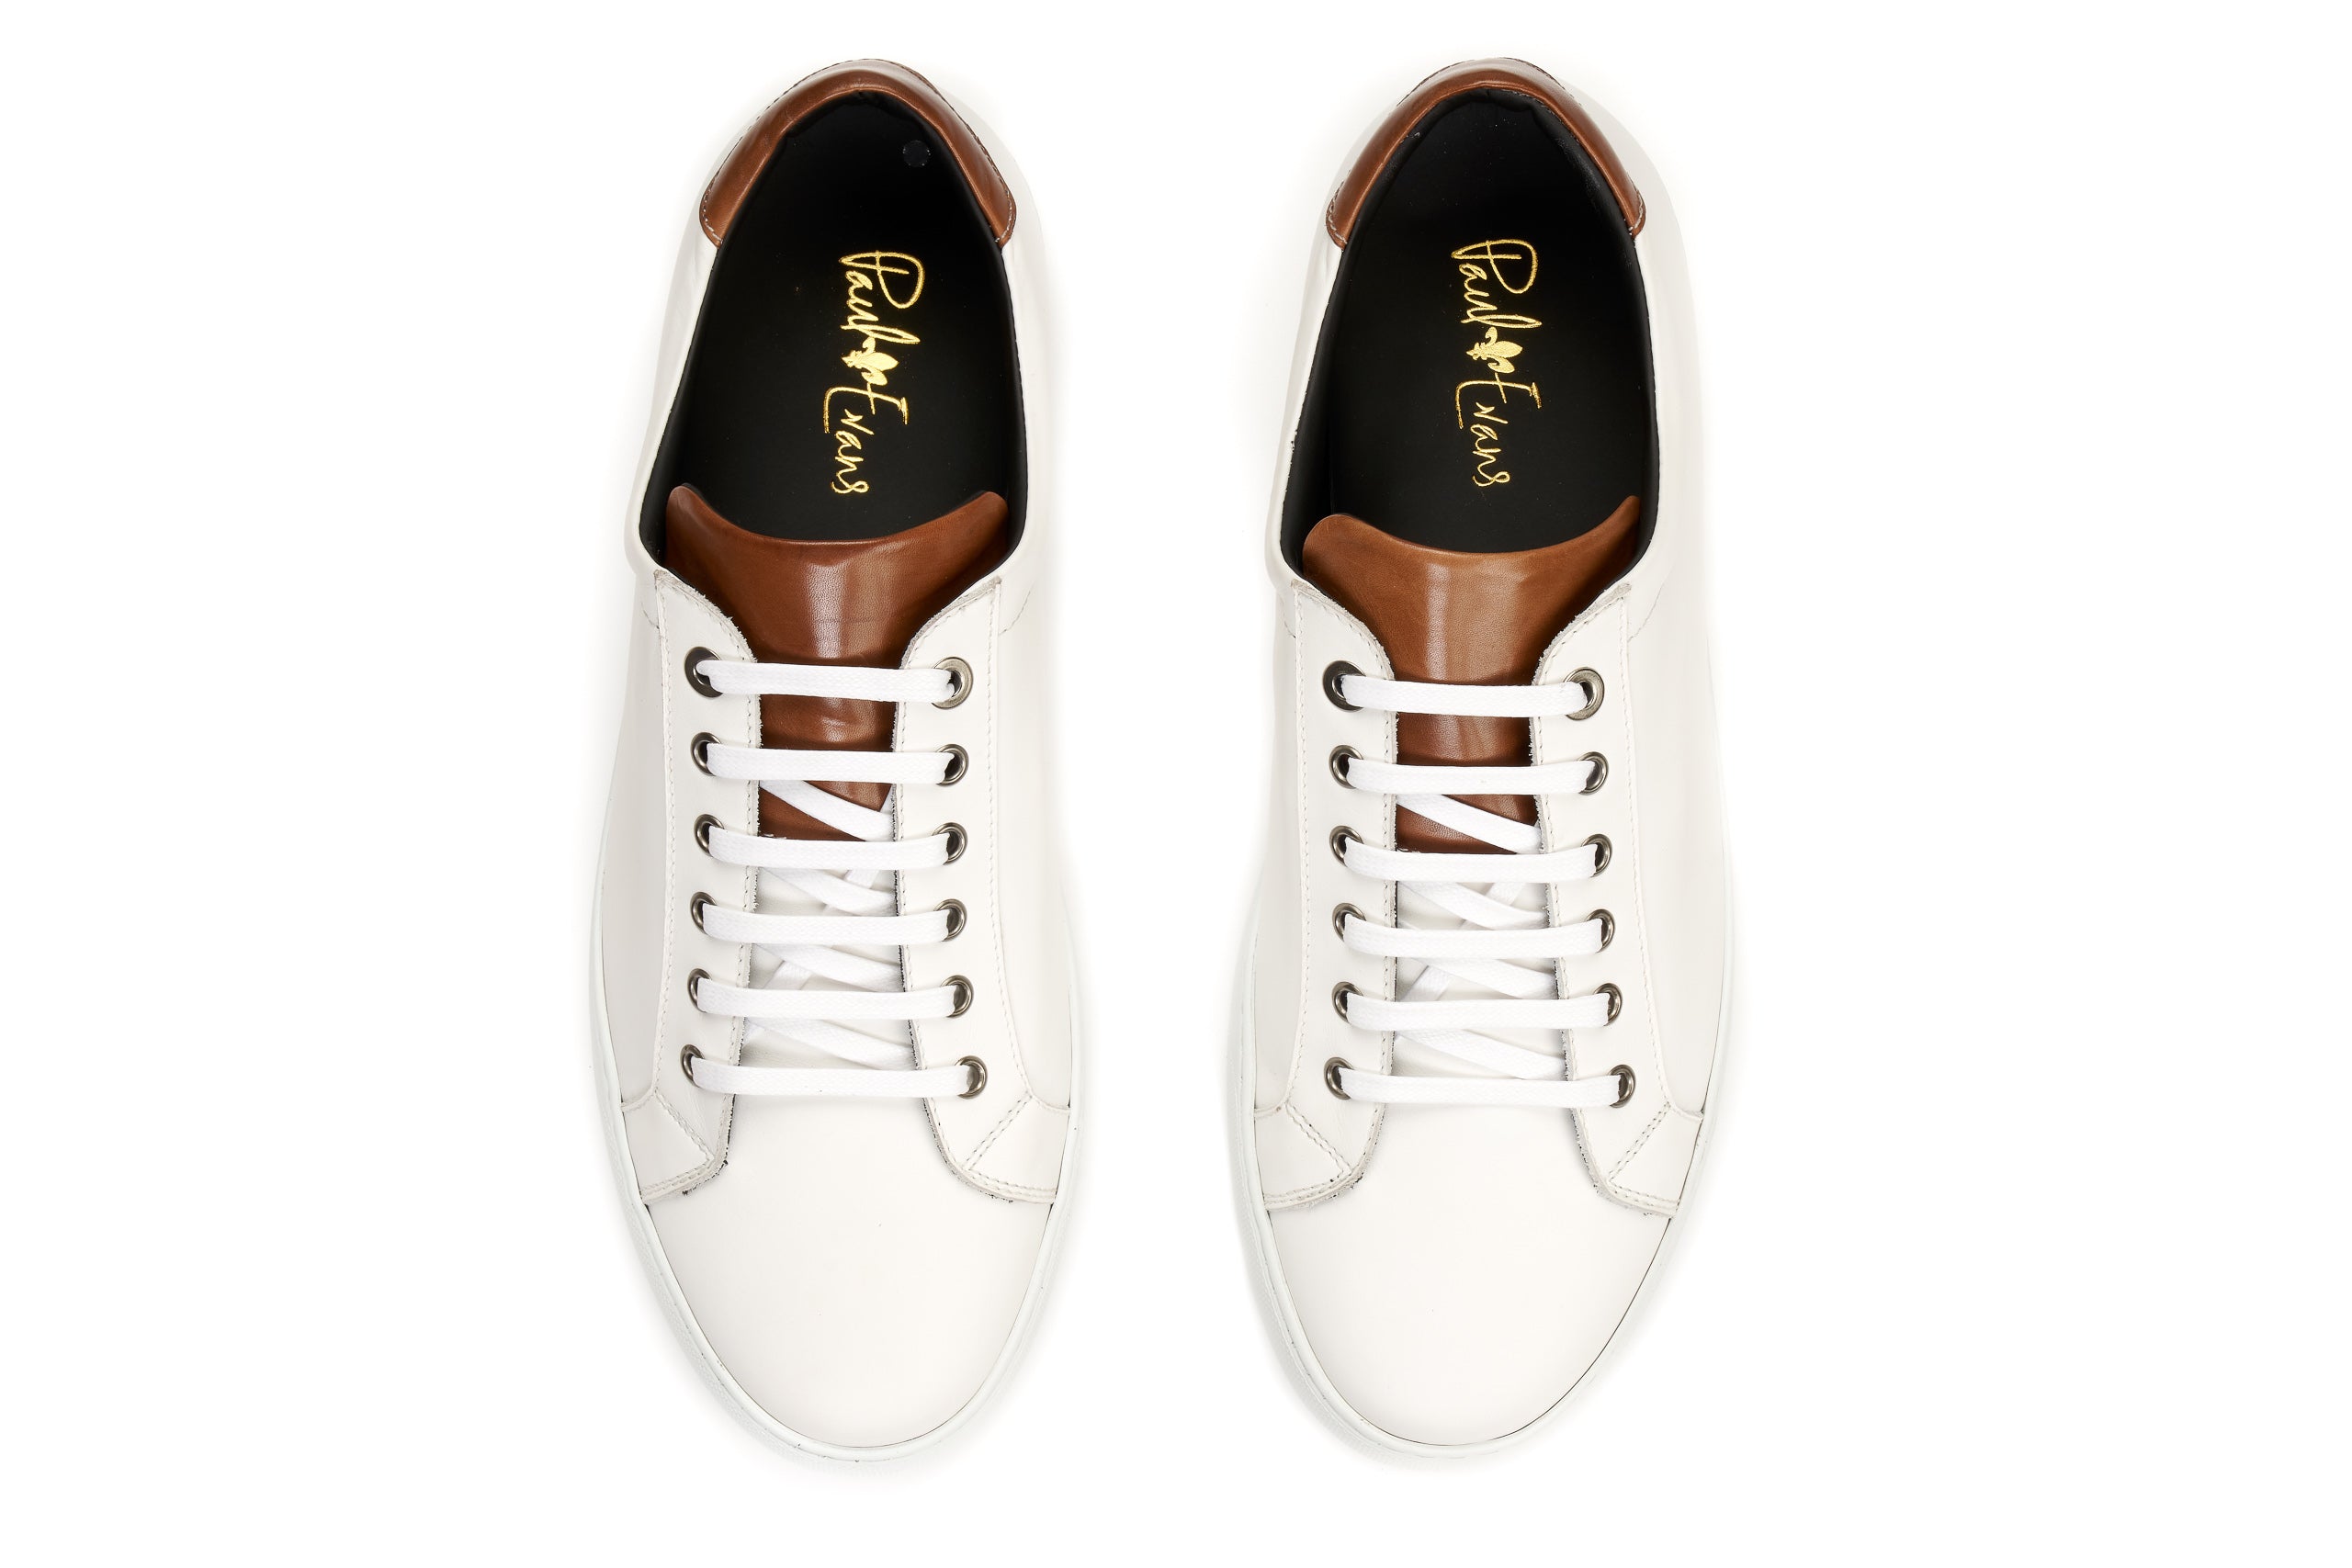 The Smith Low-Top Sneaker - White